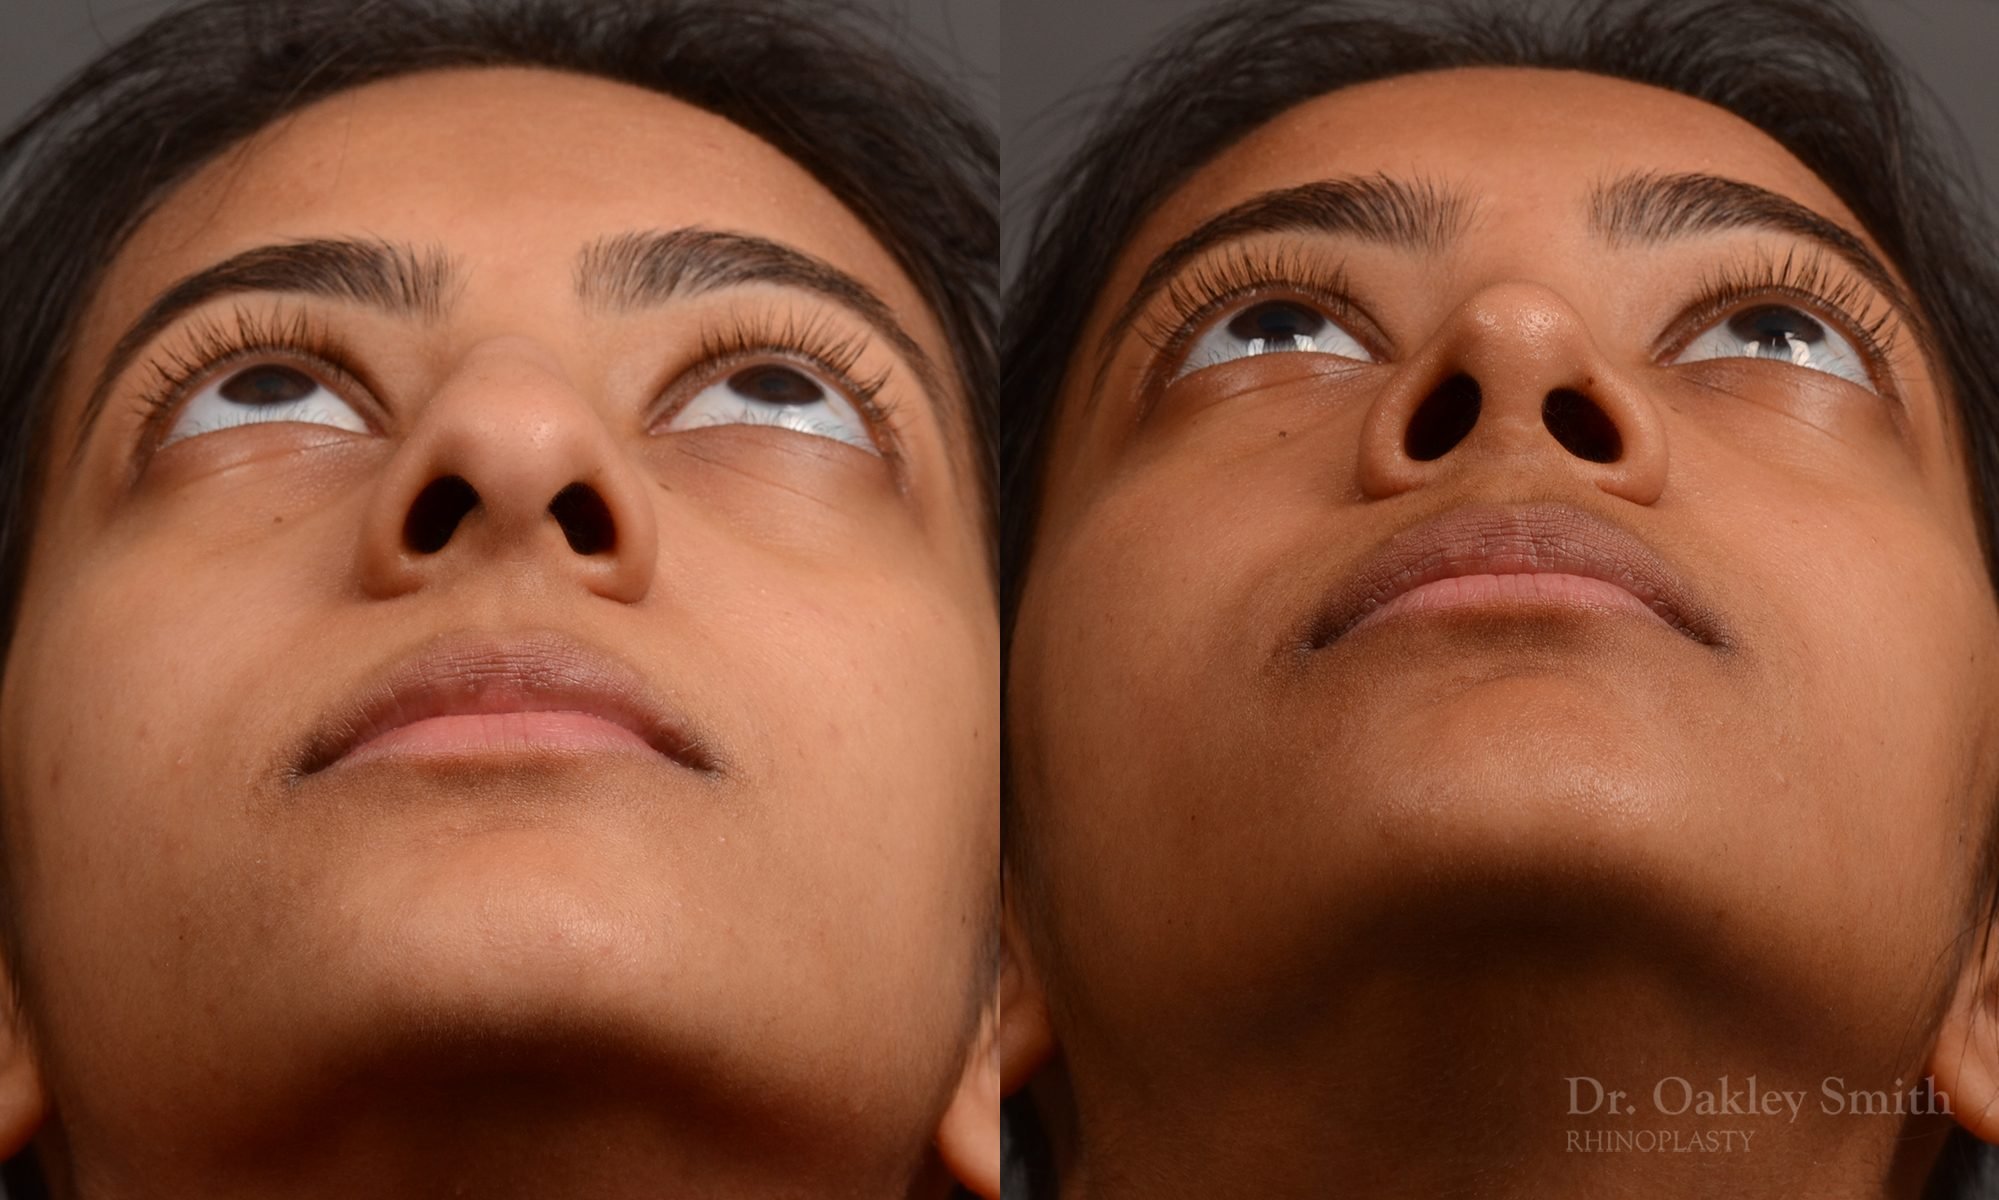 399 - Expert Rhinoplasty nose job surgery to reduce the size of this womans nose.